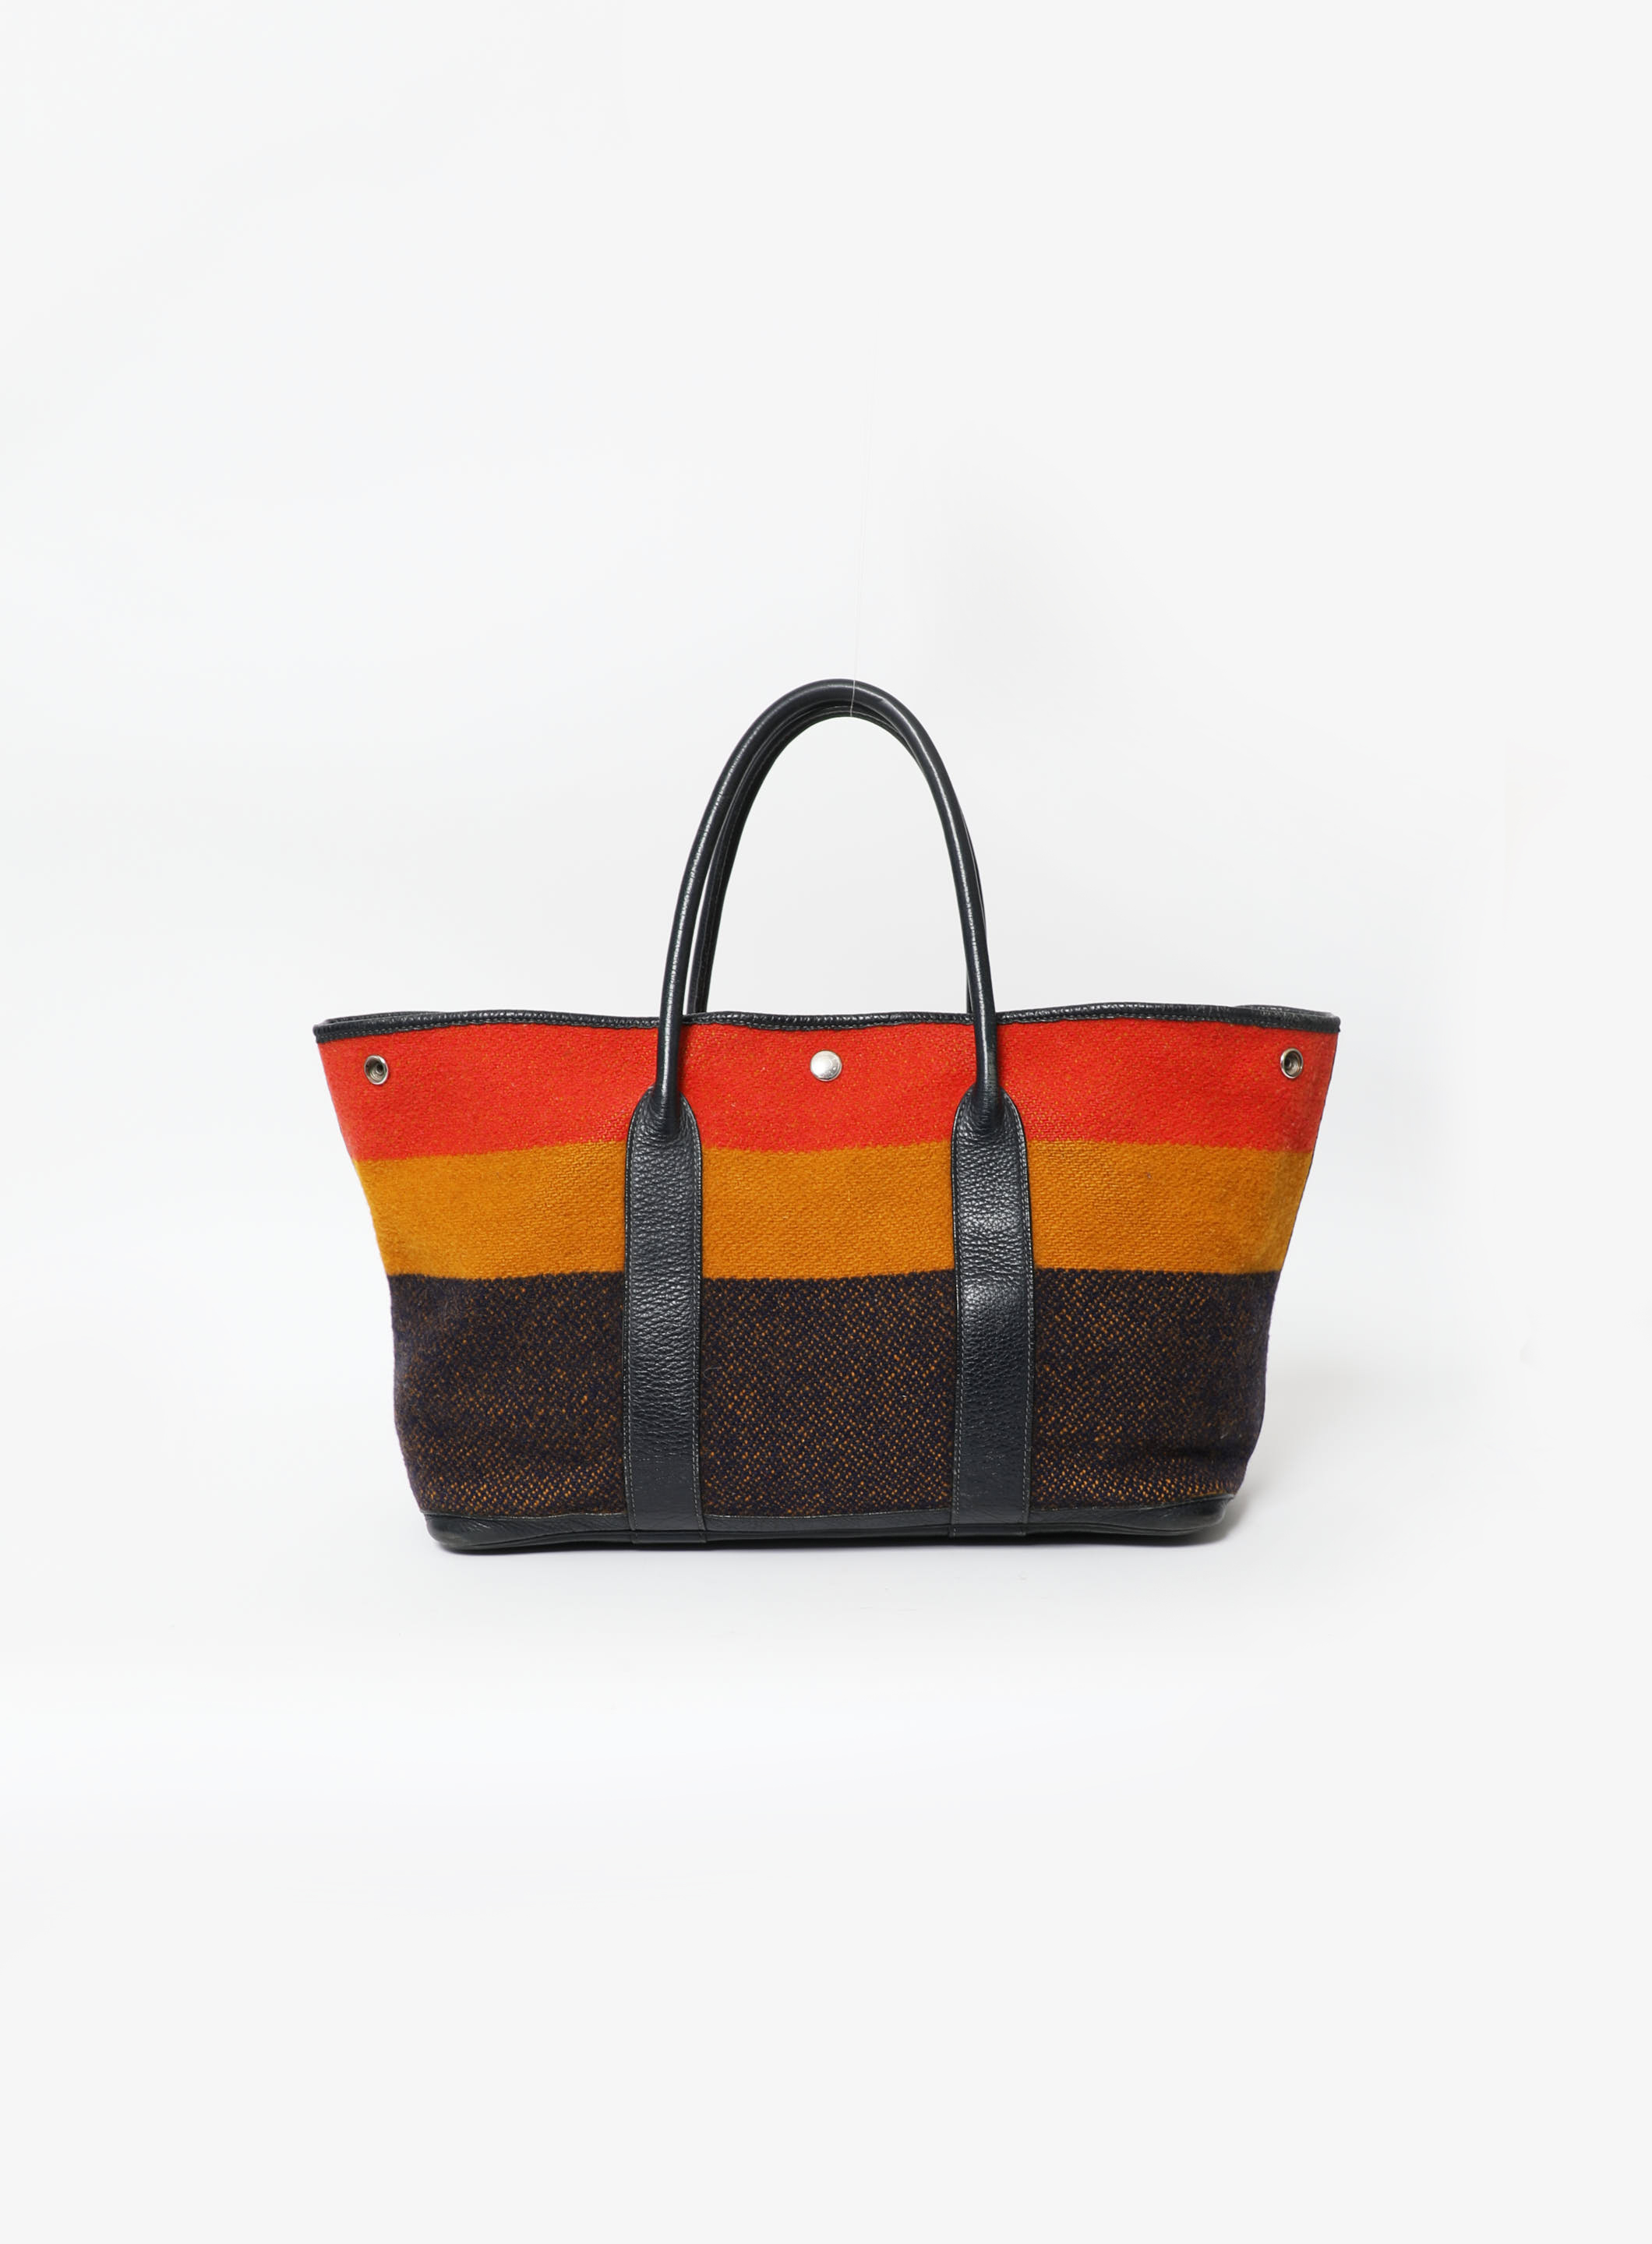 HERMES Garden party PM Tote Bag from Japan